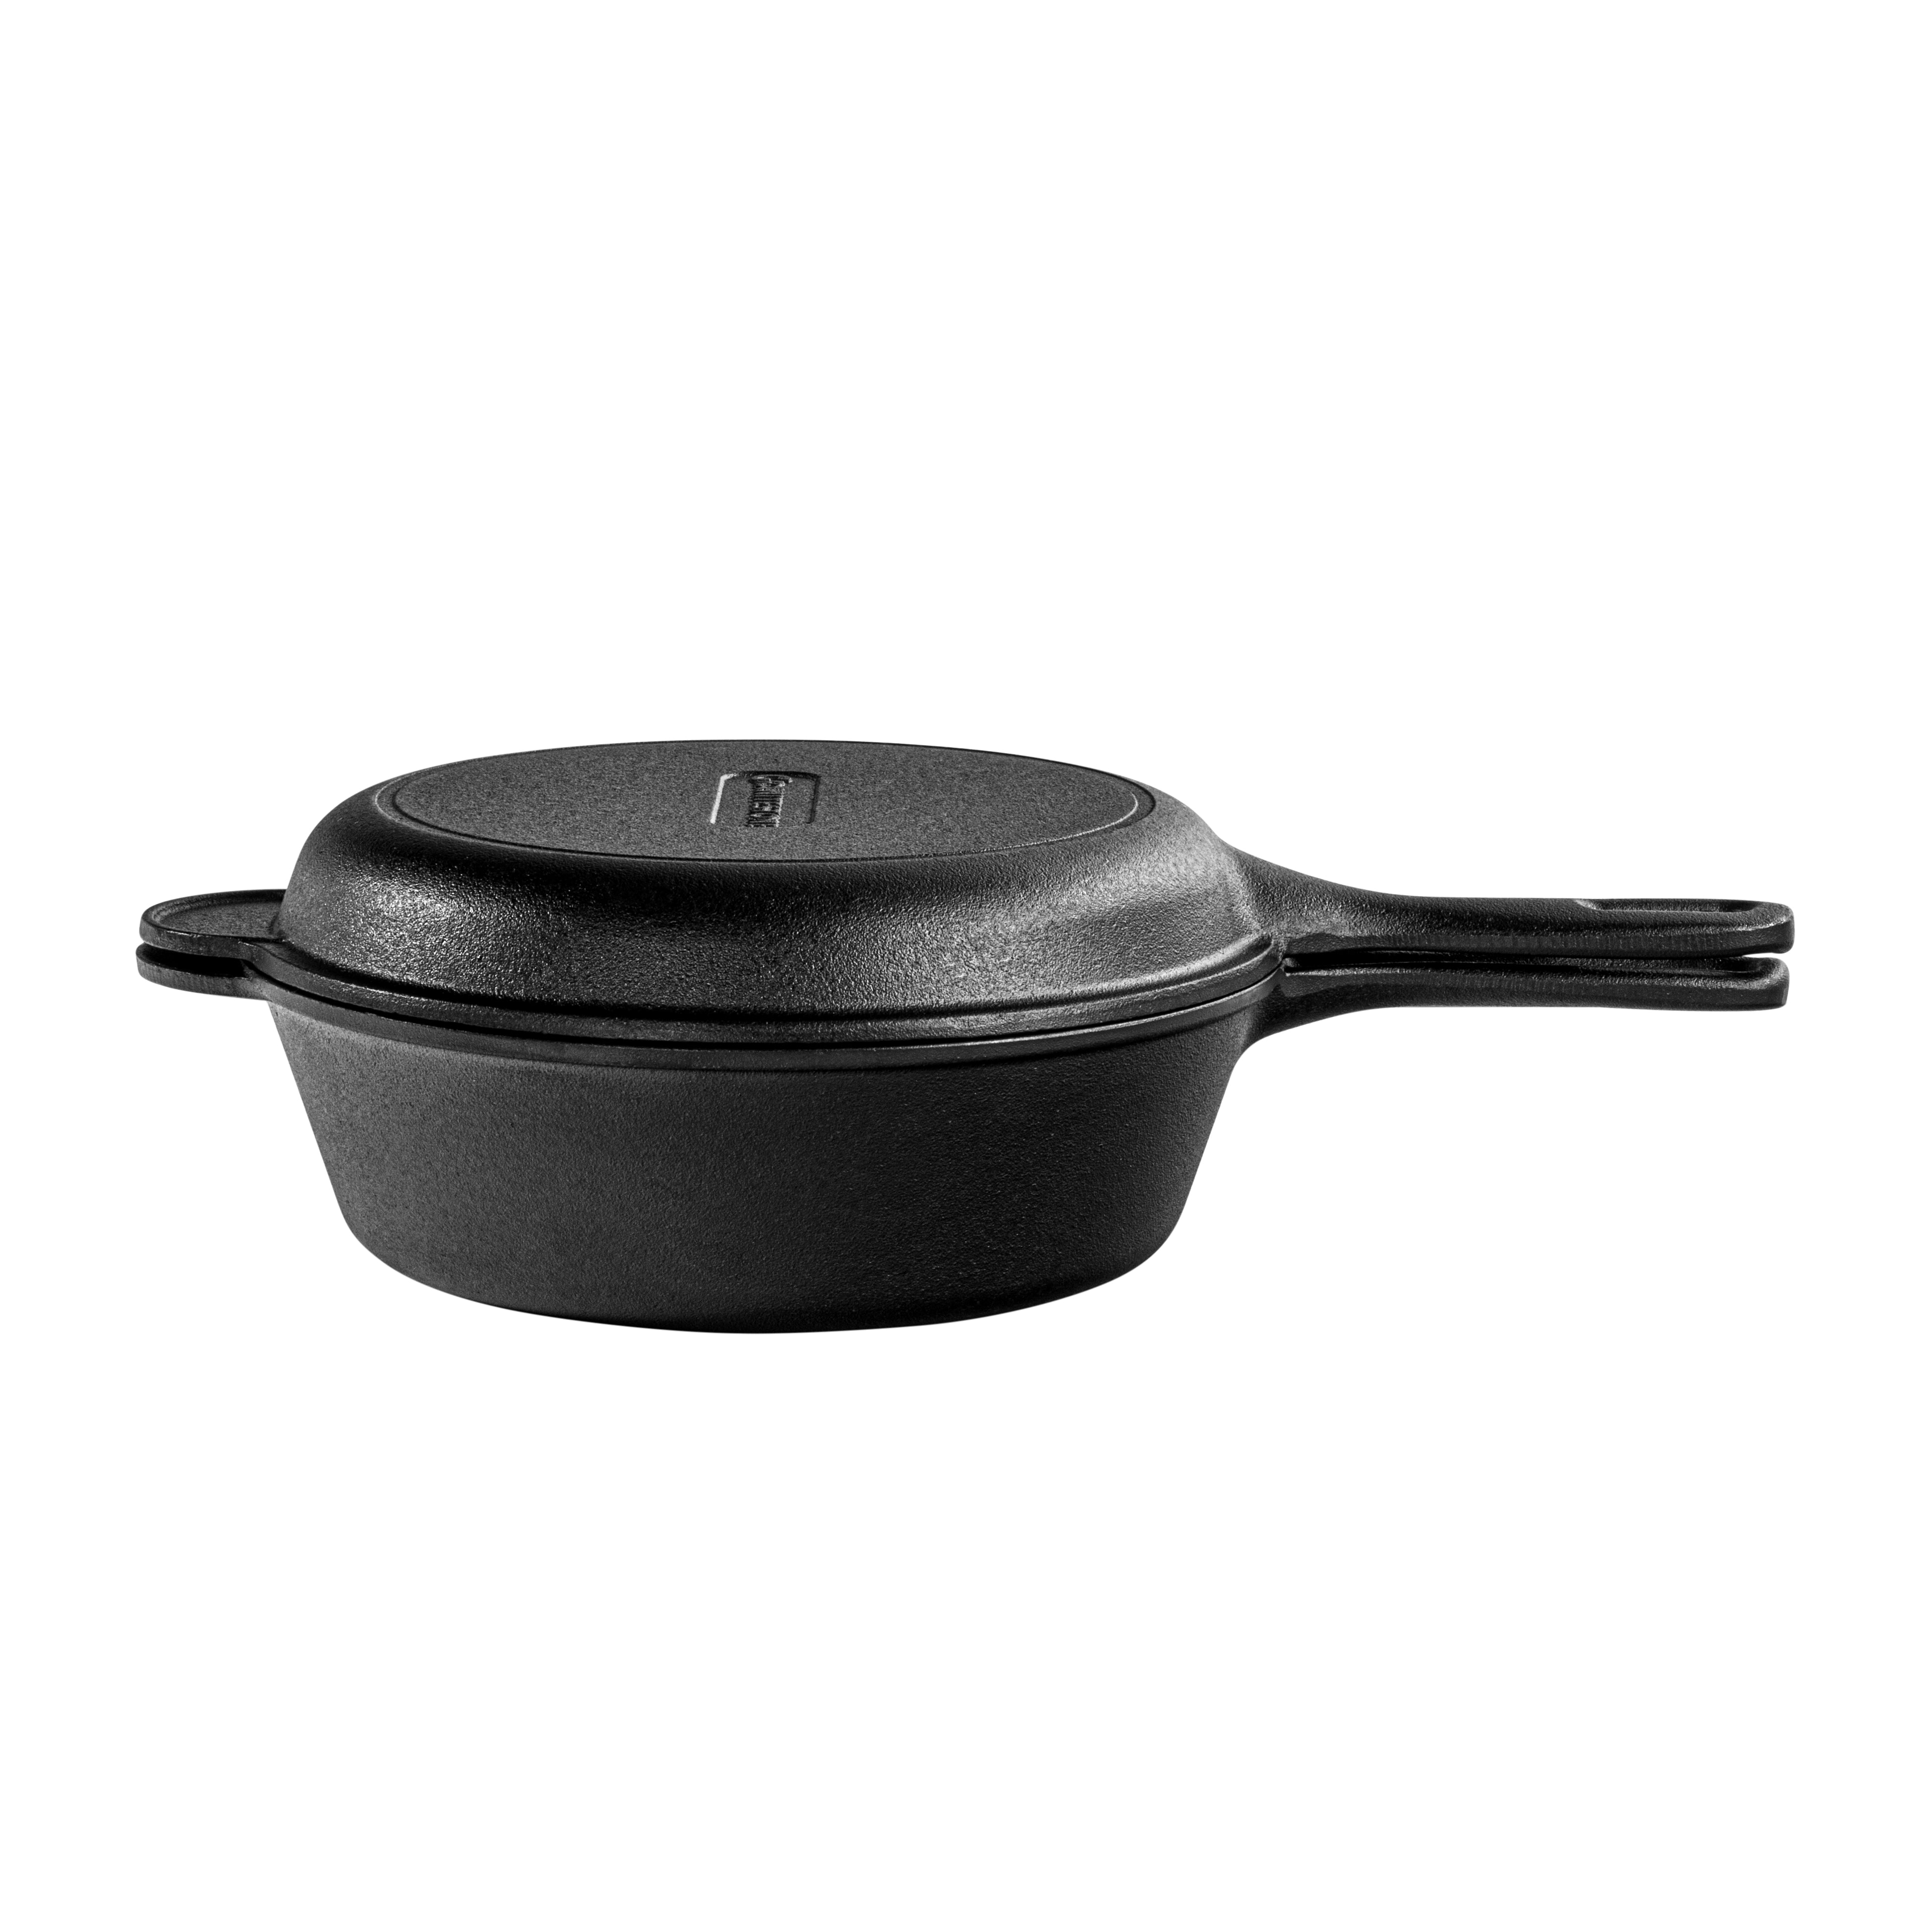 Greater Goods Cast Iron Skillets, Pans, and Dutch Ovens (Dutch Oven), Black